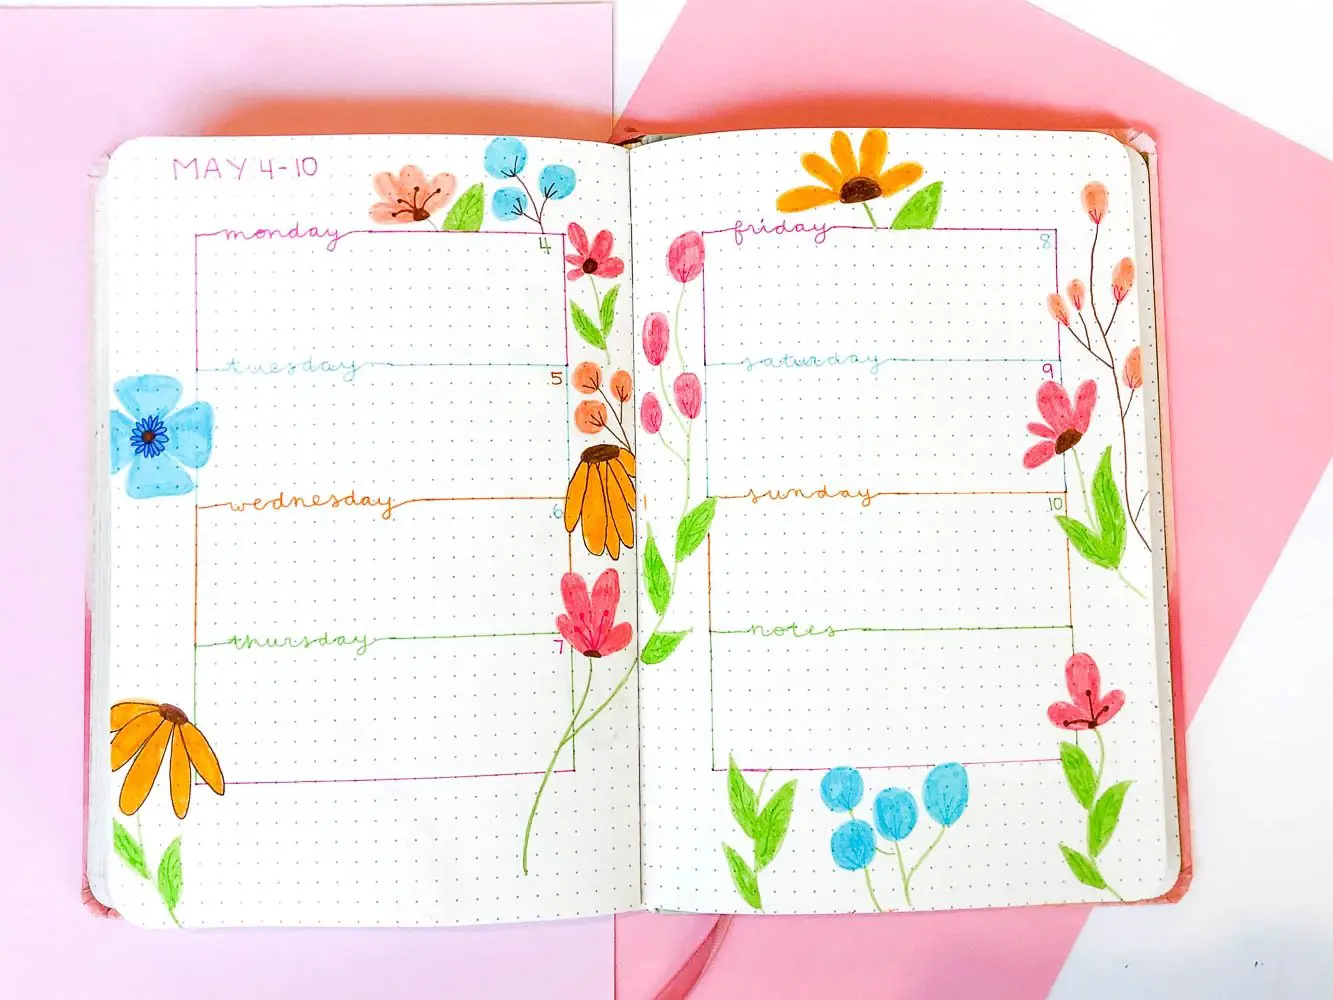 Bullet journal spring weekly layout